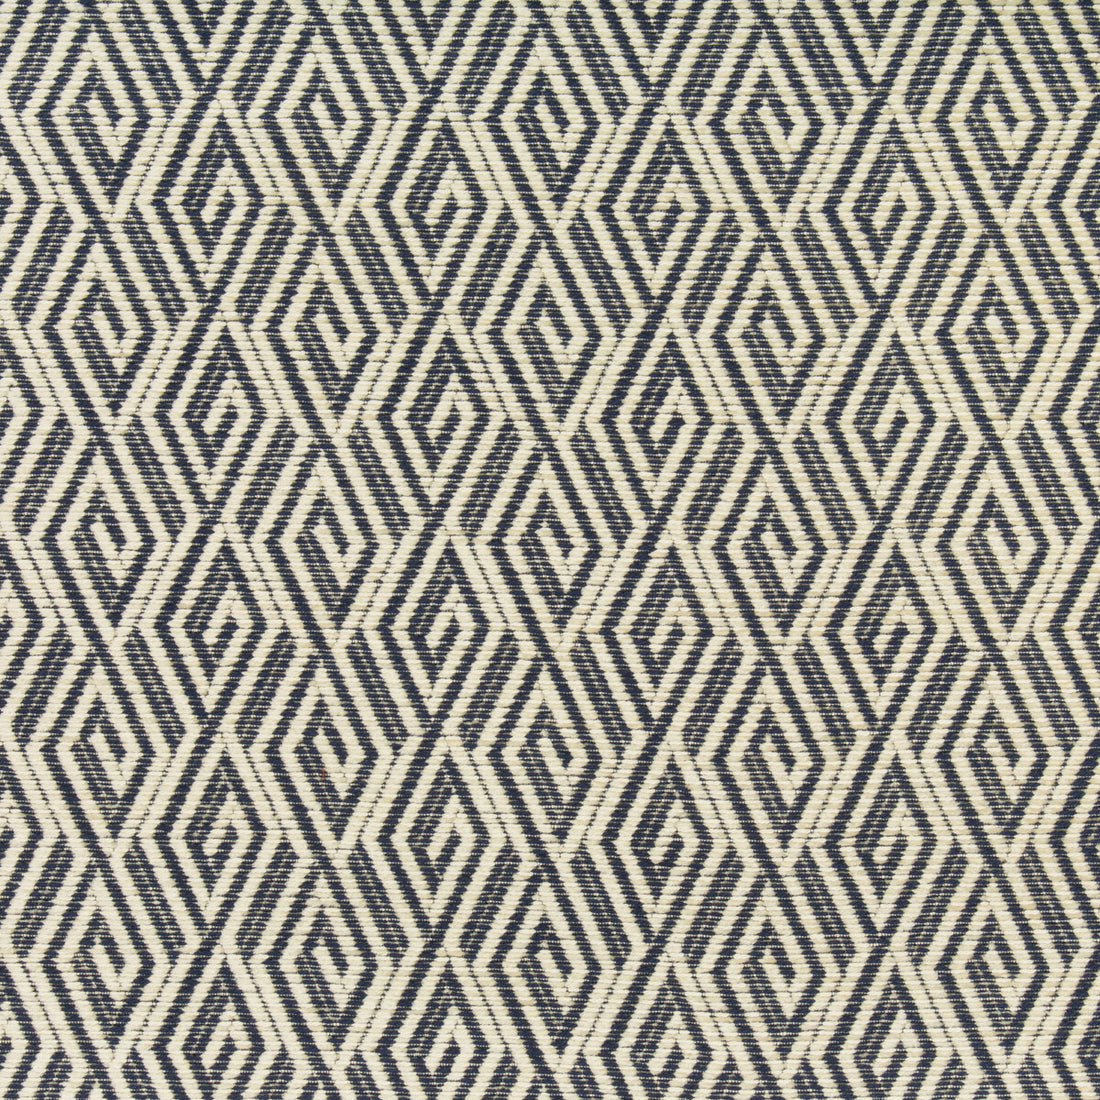 Kravet Design fabric in 34972-50 color - pattern 34972.50.0 - by Kravet Design in the Performance Crypton Home collection